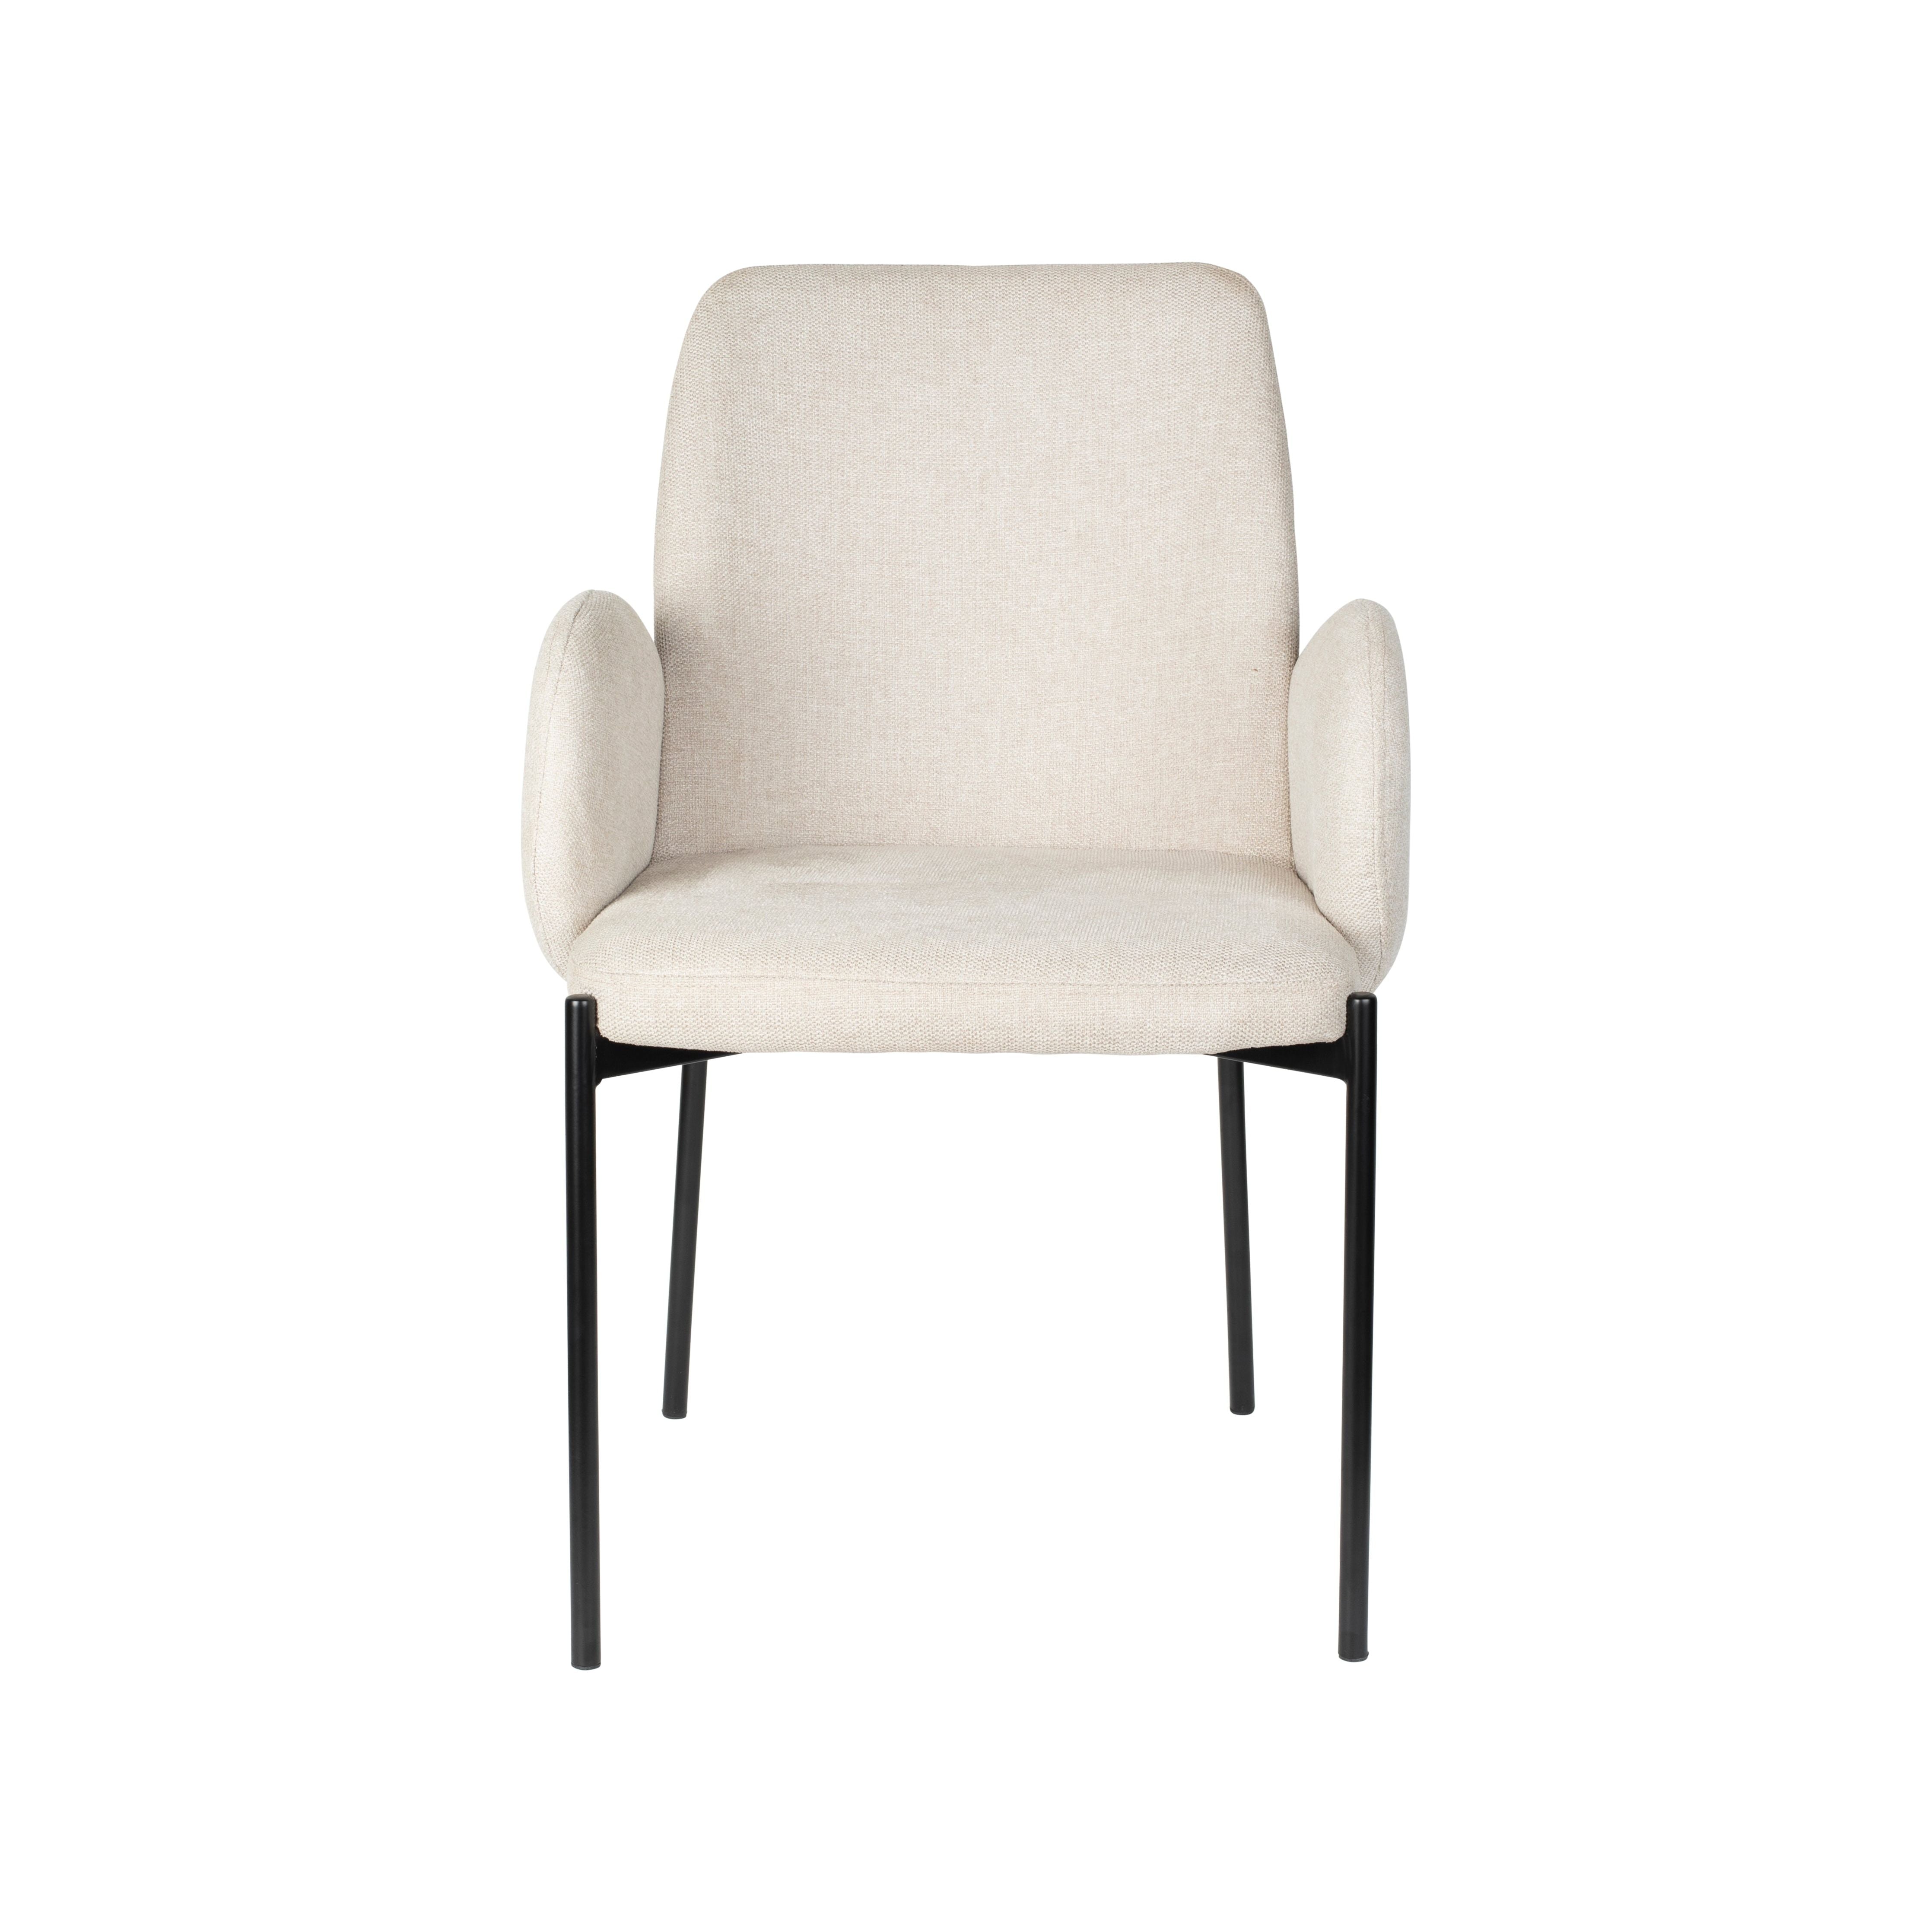 Chair tjarda taupe | 2 pieces